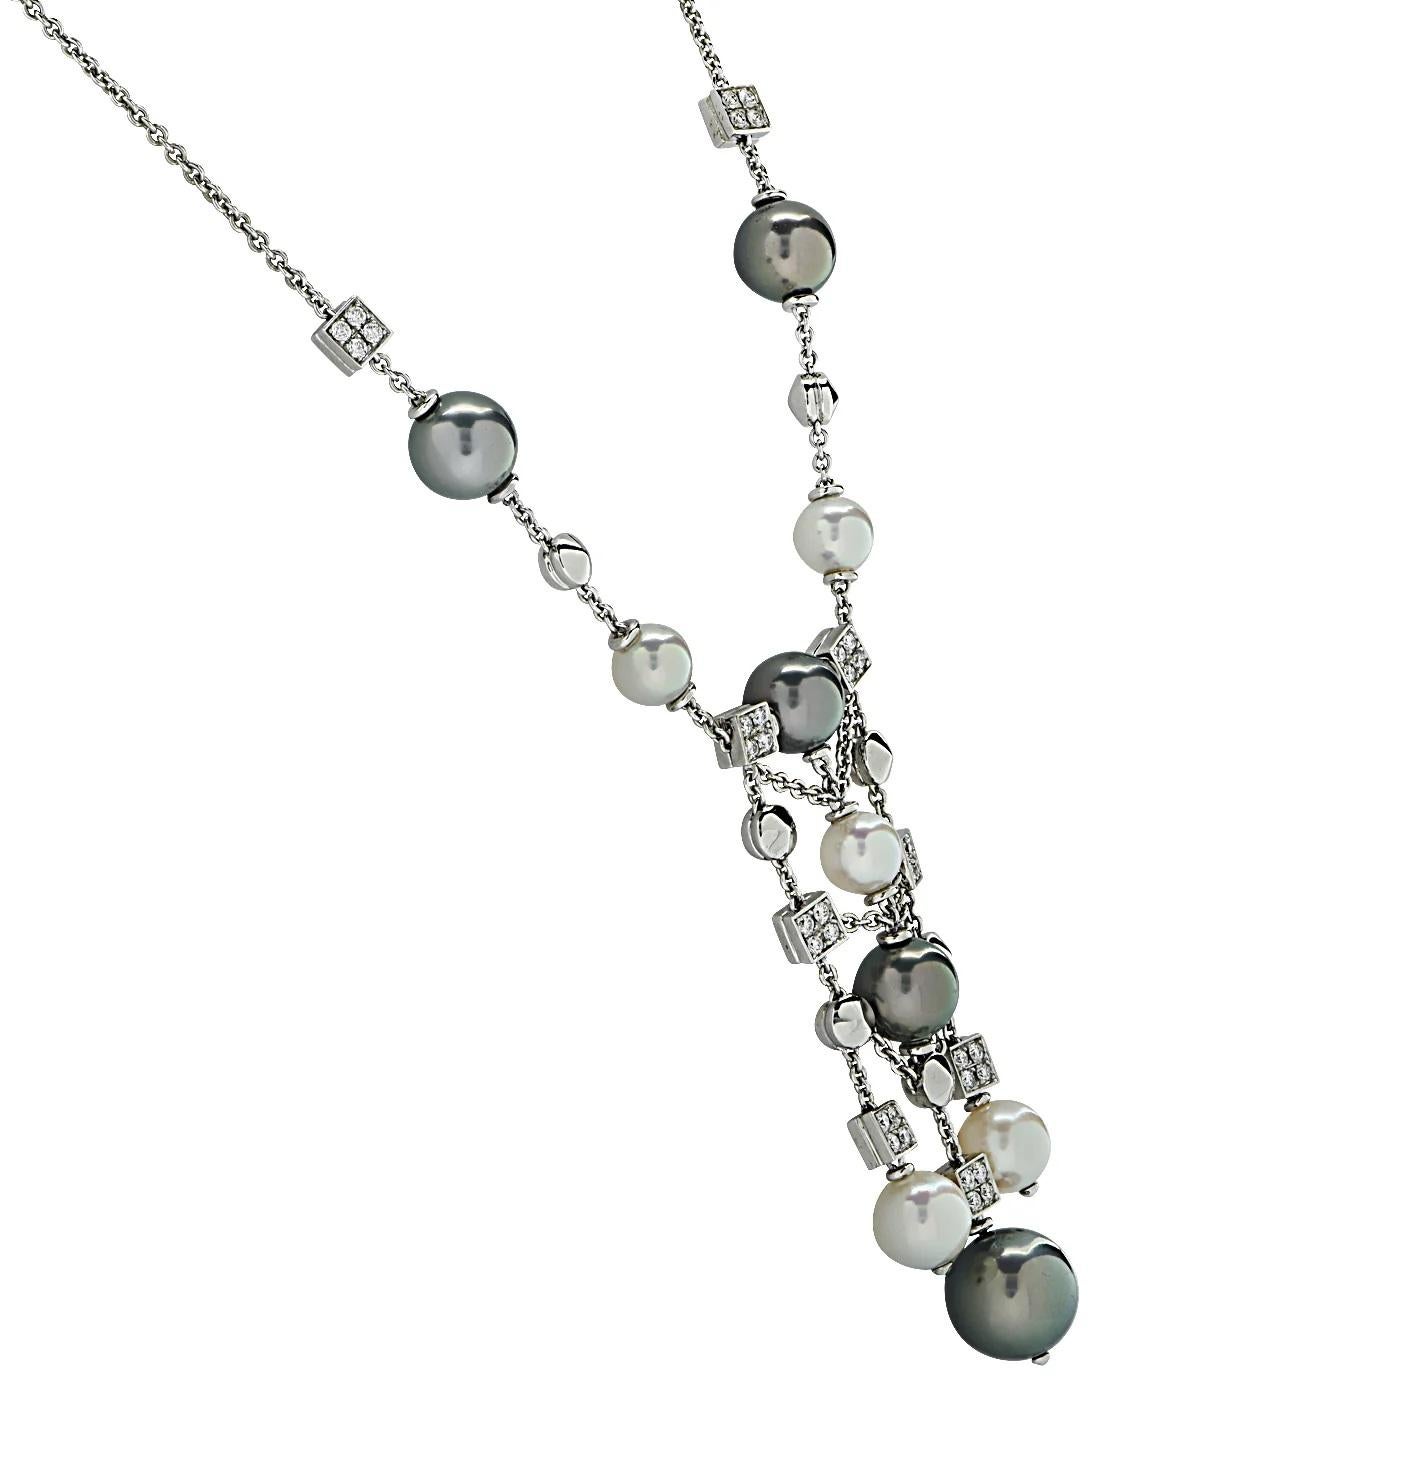 This Bvlgari necklace is from the Lucea collection and is indeed magnificent. Crafted in 18k white gold, it features a combination of dark grey and white pearls, as well as round brilliant cut diamonds.

The necklace showcases a total of six round